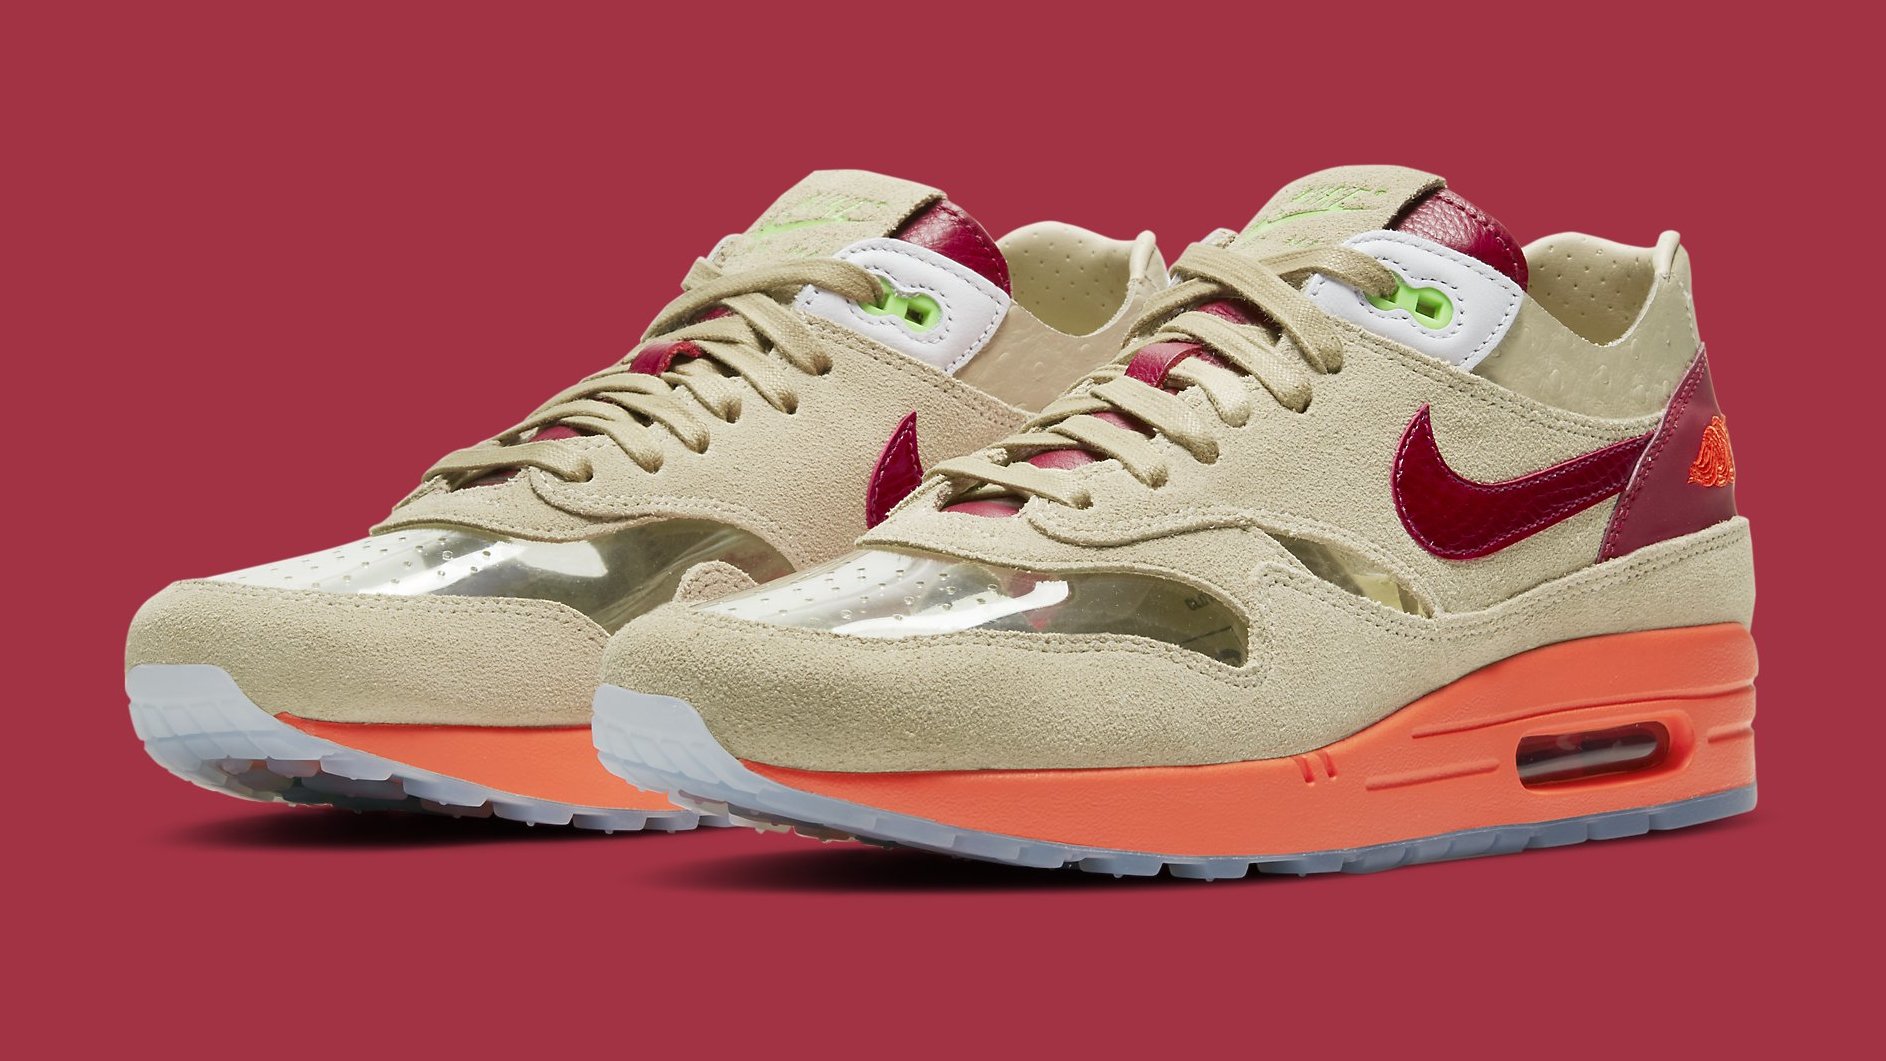 Release Date for Clot's 'Kiss of Death' Nike Air Max 1 Retro ...